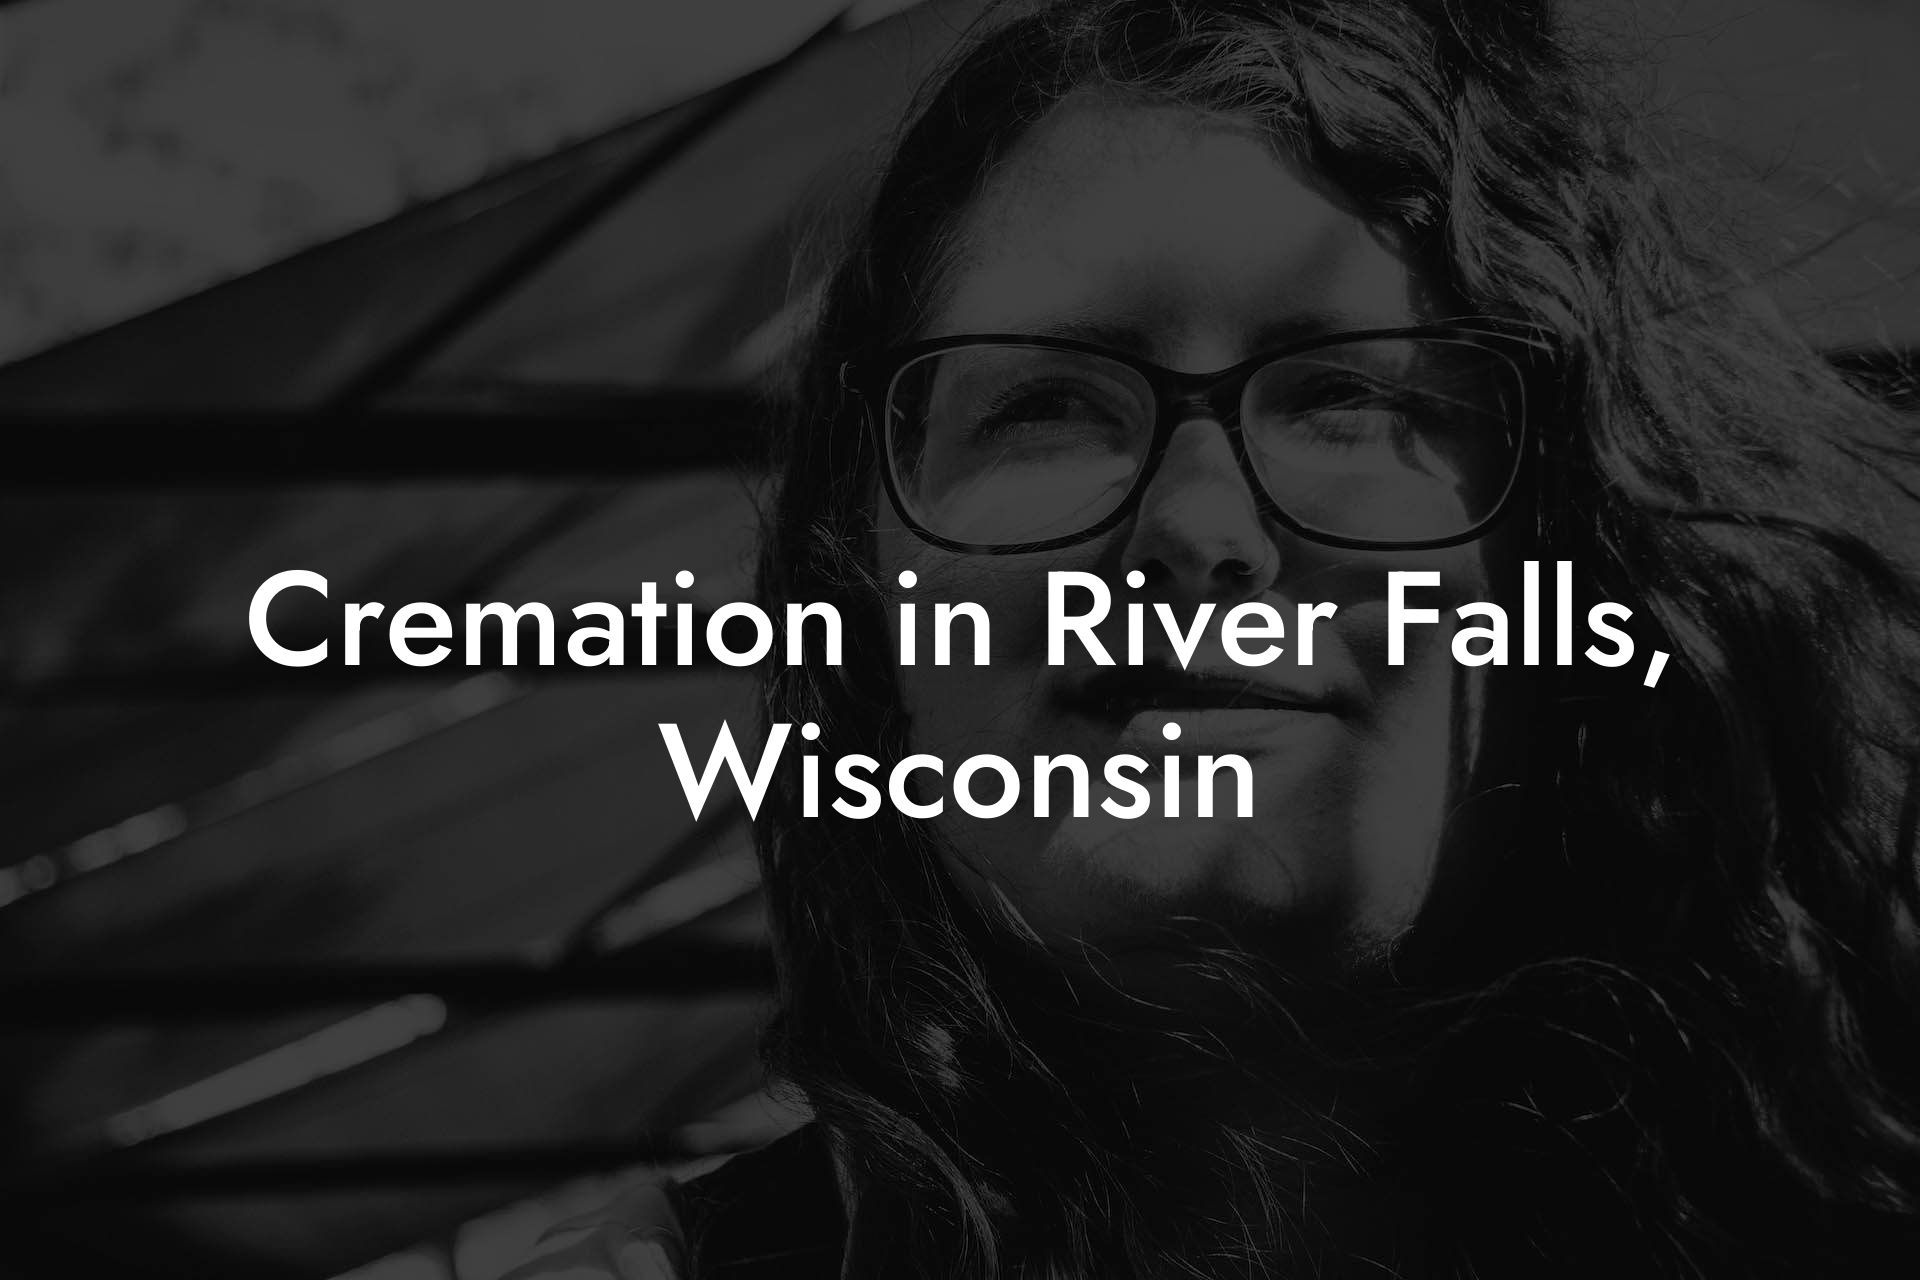 Cremation in River Falls, Wisconsin